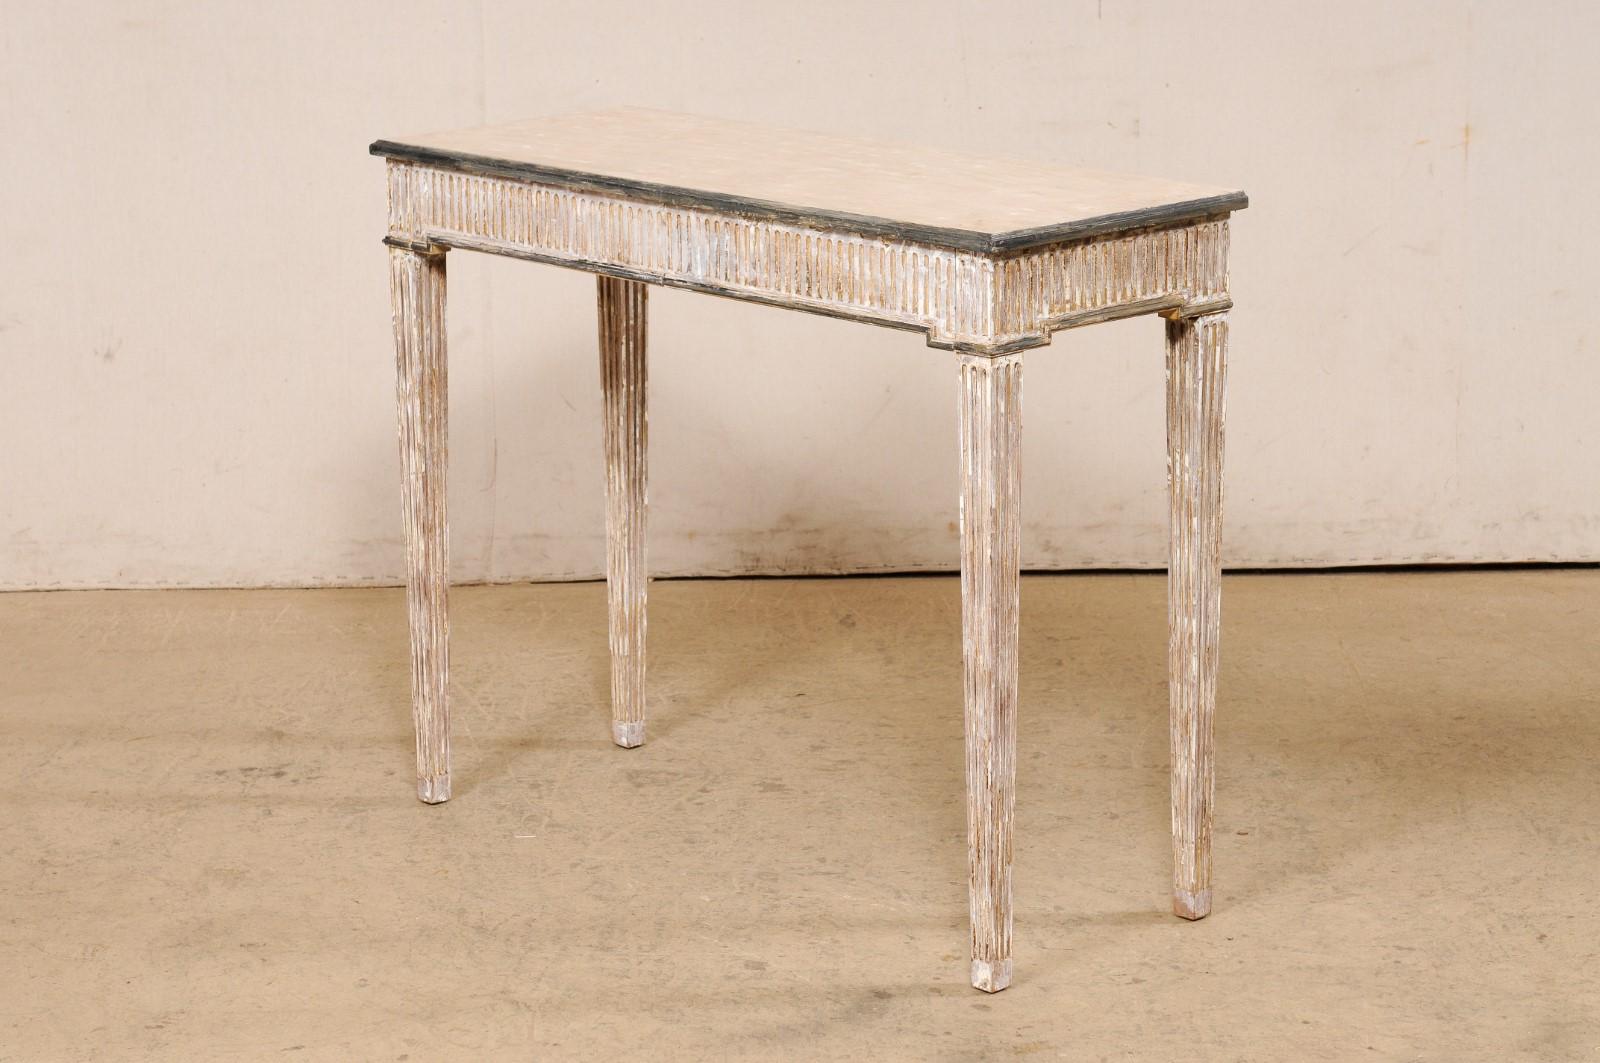 A Slender Italian Console Table Embellished w/Fluted Carvings, Mid 20th C. For Sale 4